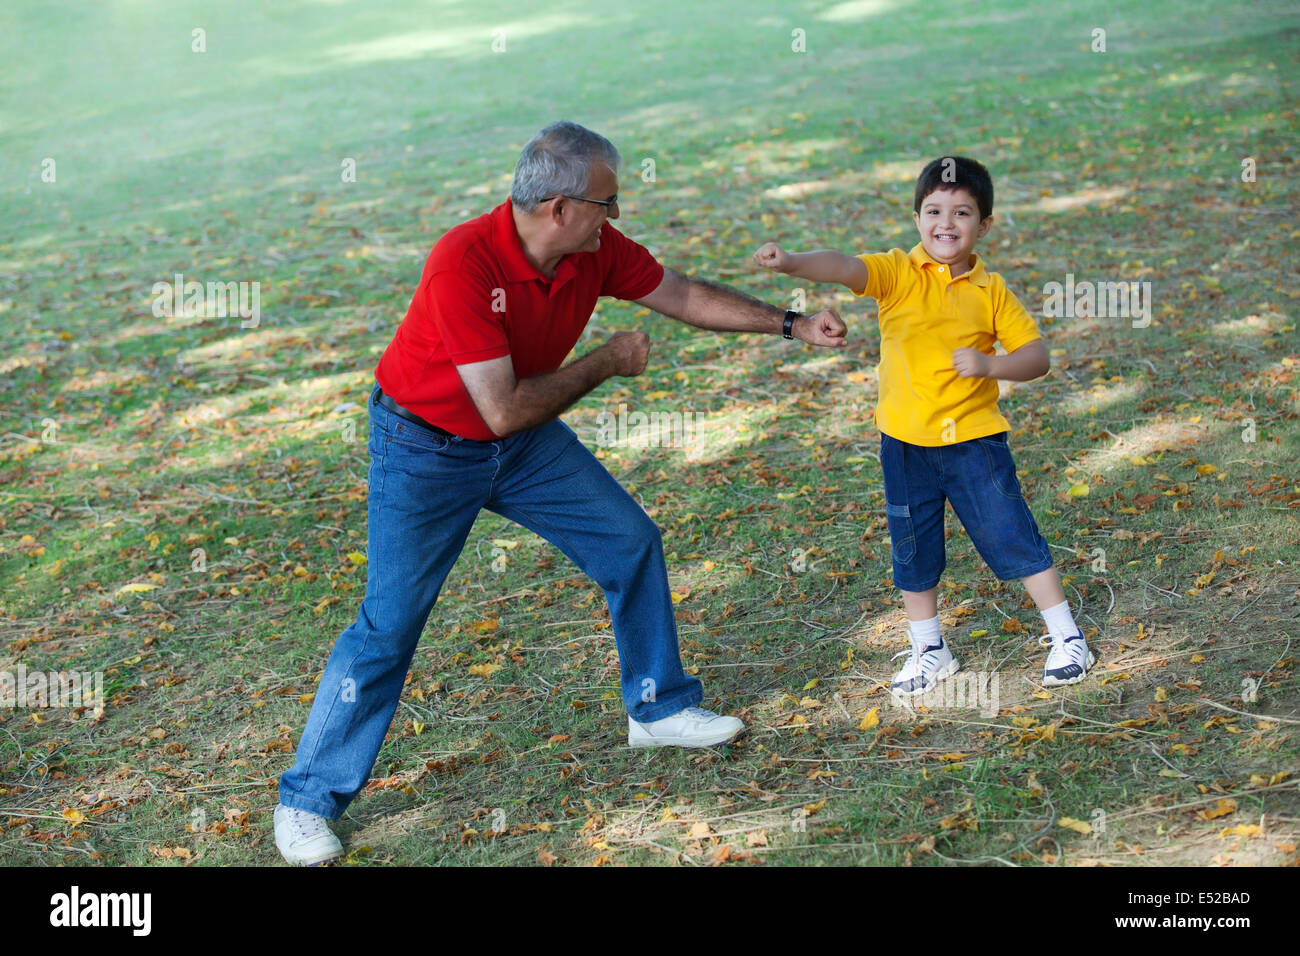 Grandfather having fun with grandson in park Stock Photo